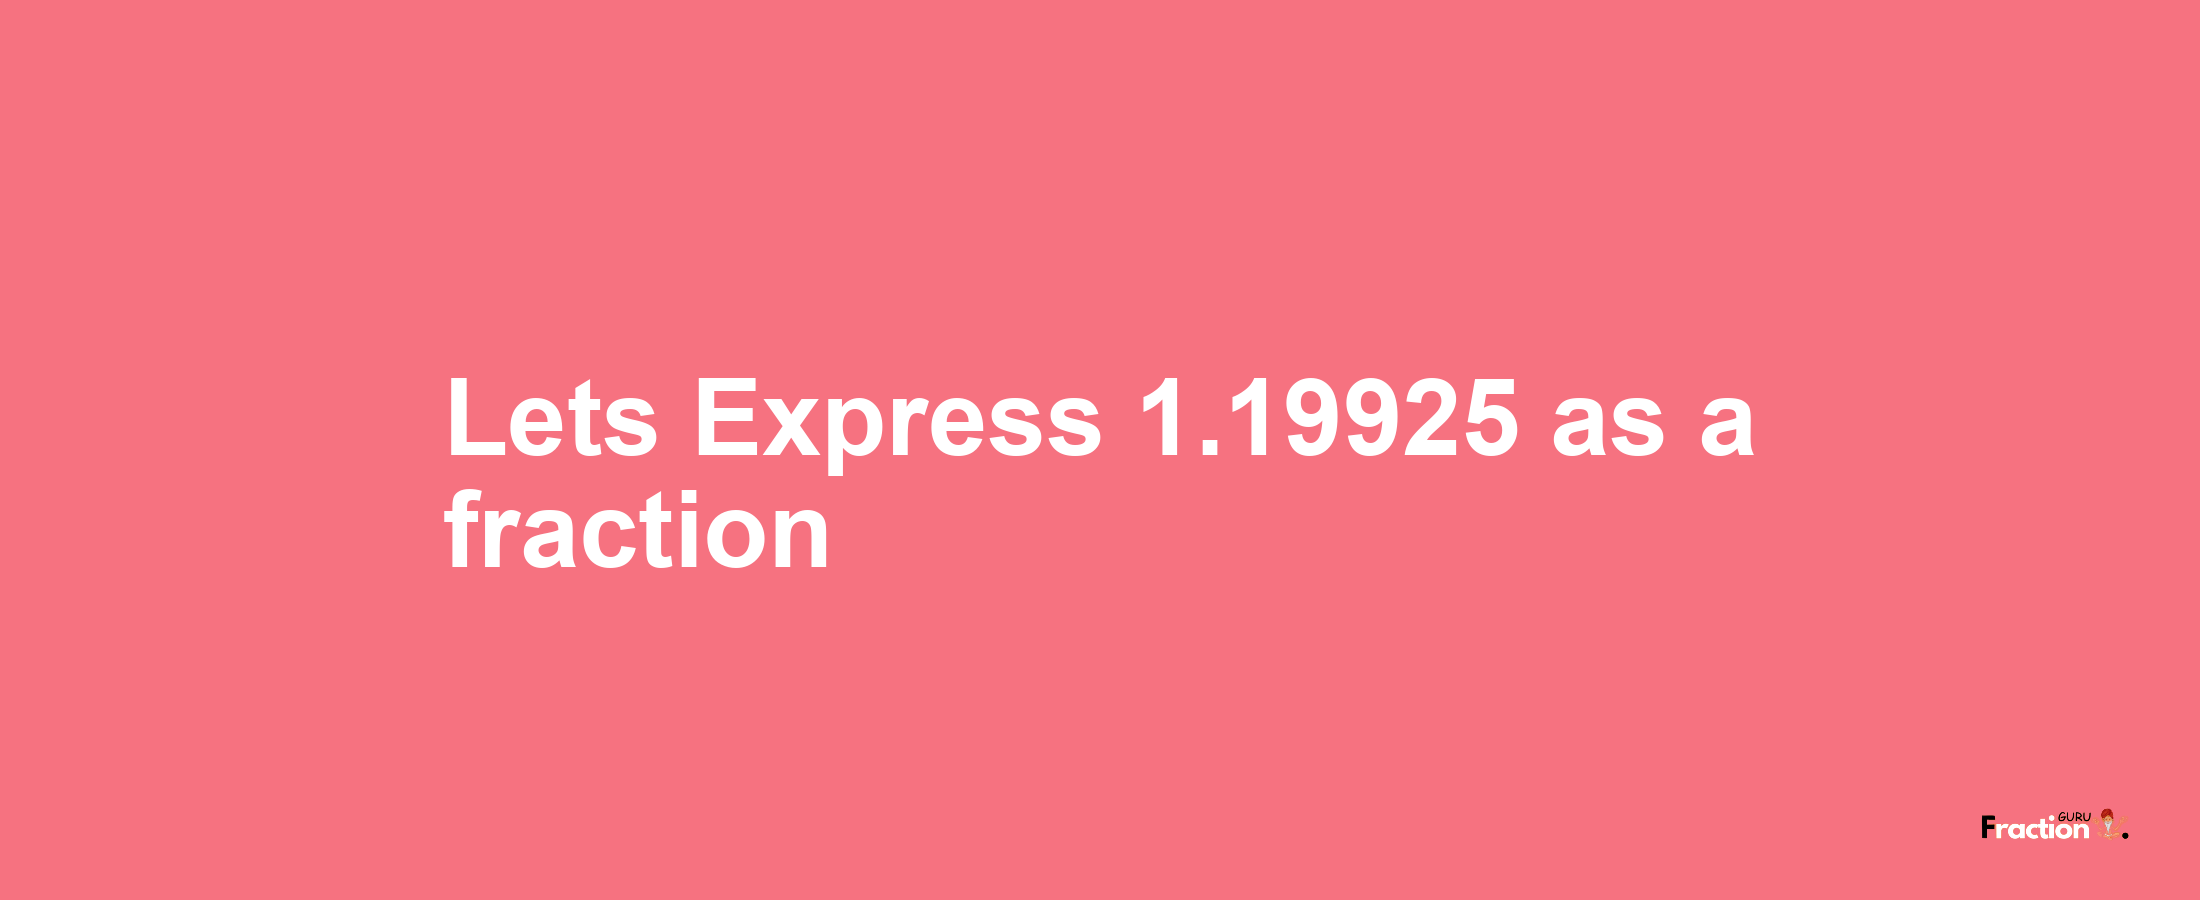 Lets Express 1.19925 as afraction